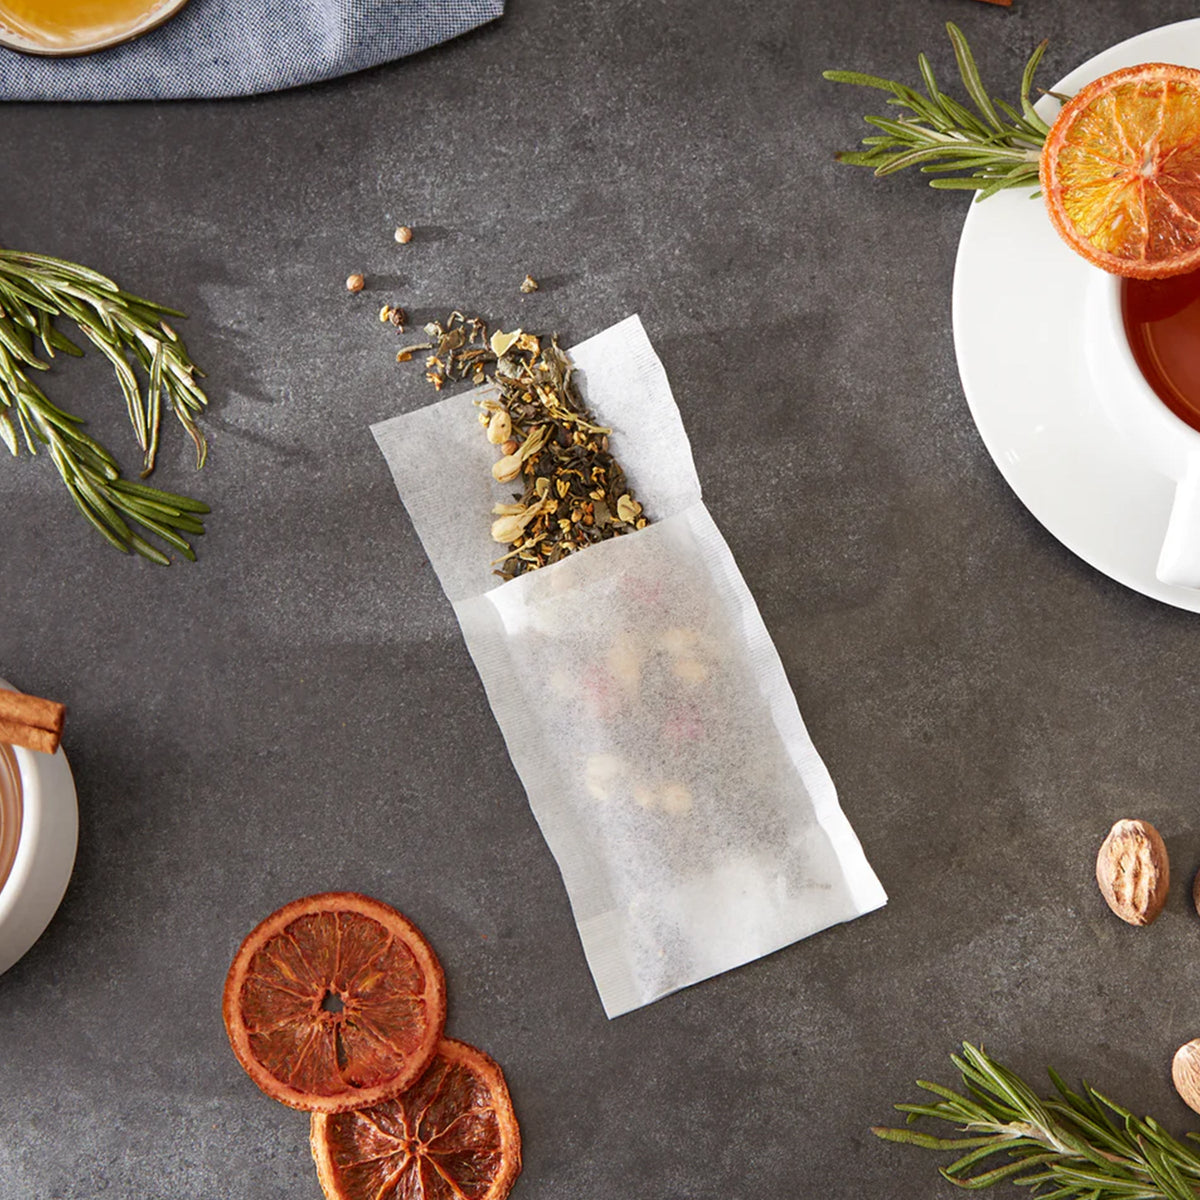 A bag of RSVP International Small Tea Filters with cinnamon sticks and oranges on a table.